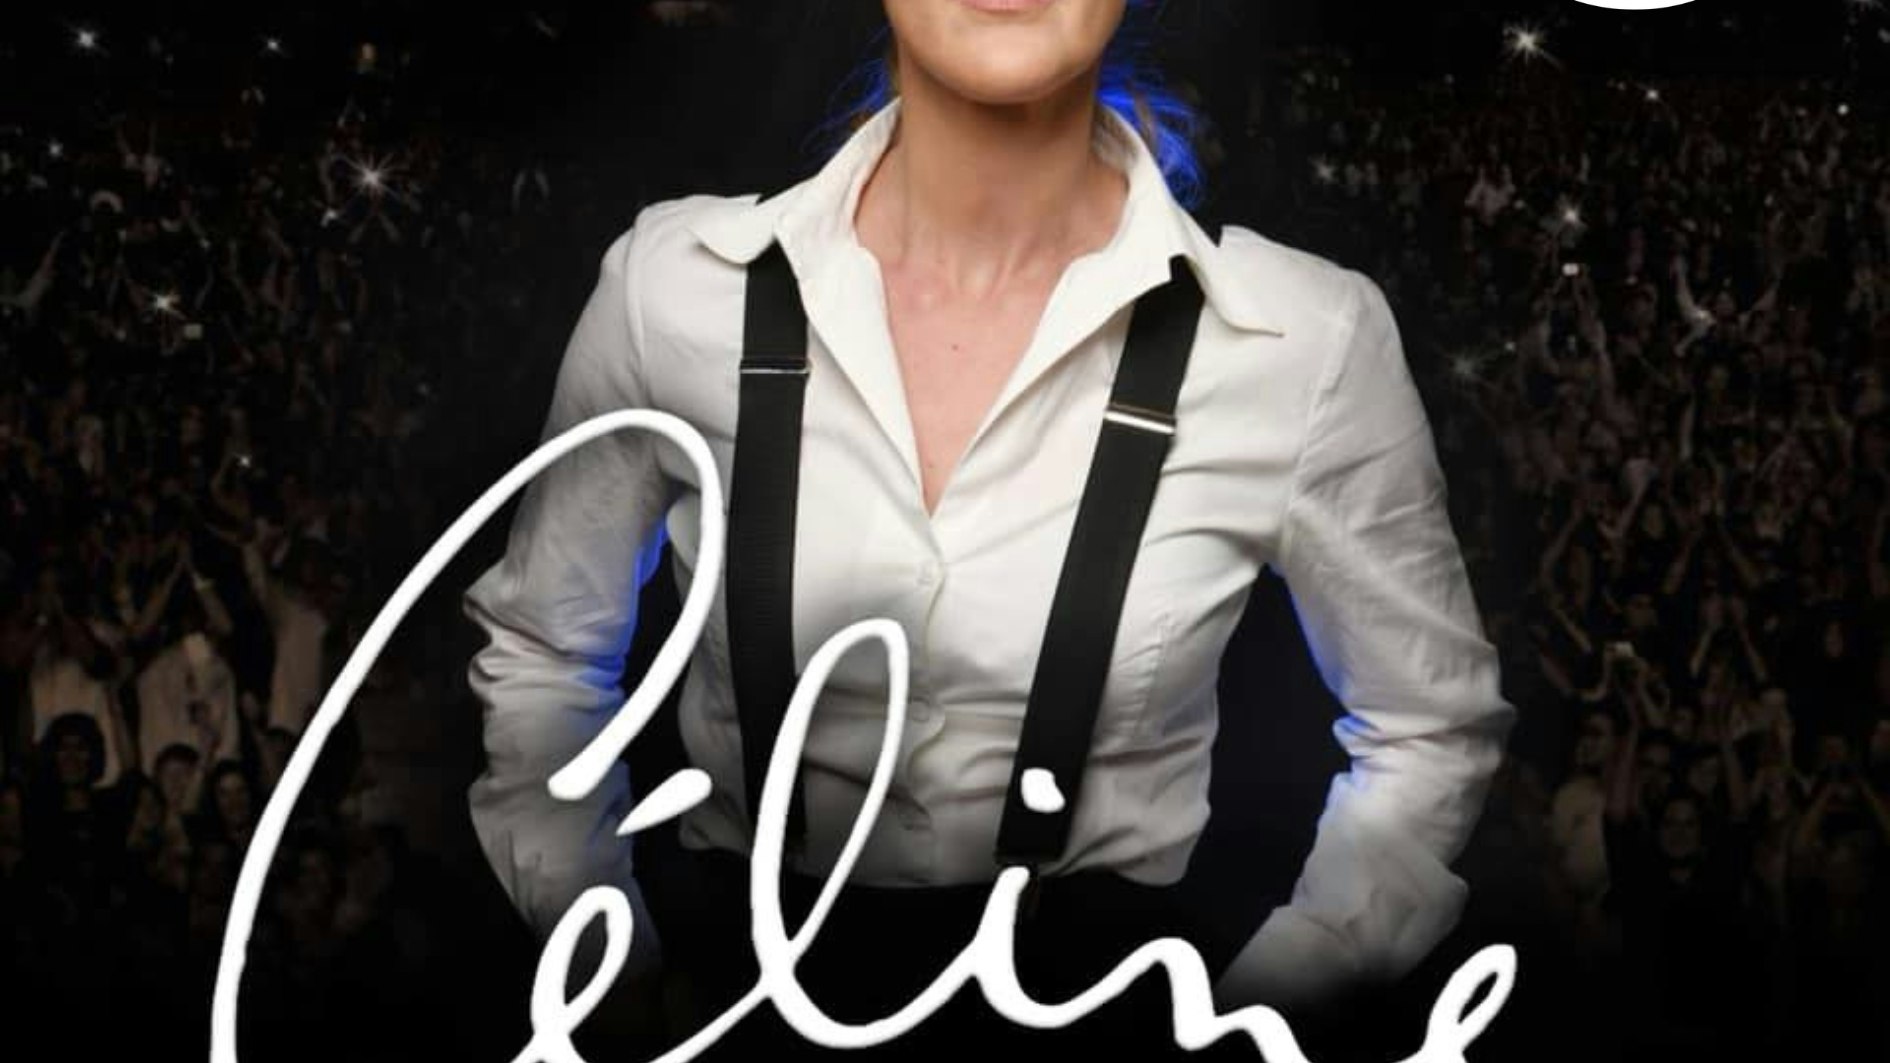 Lisa Press presents Immortality – A Tribute to Celine Dion